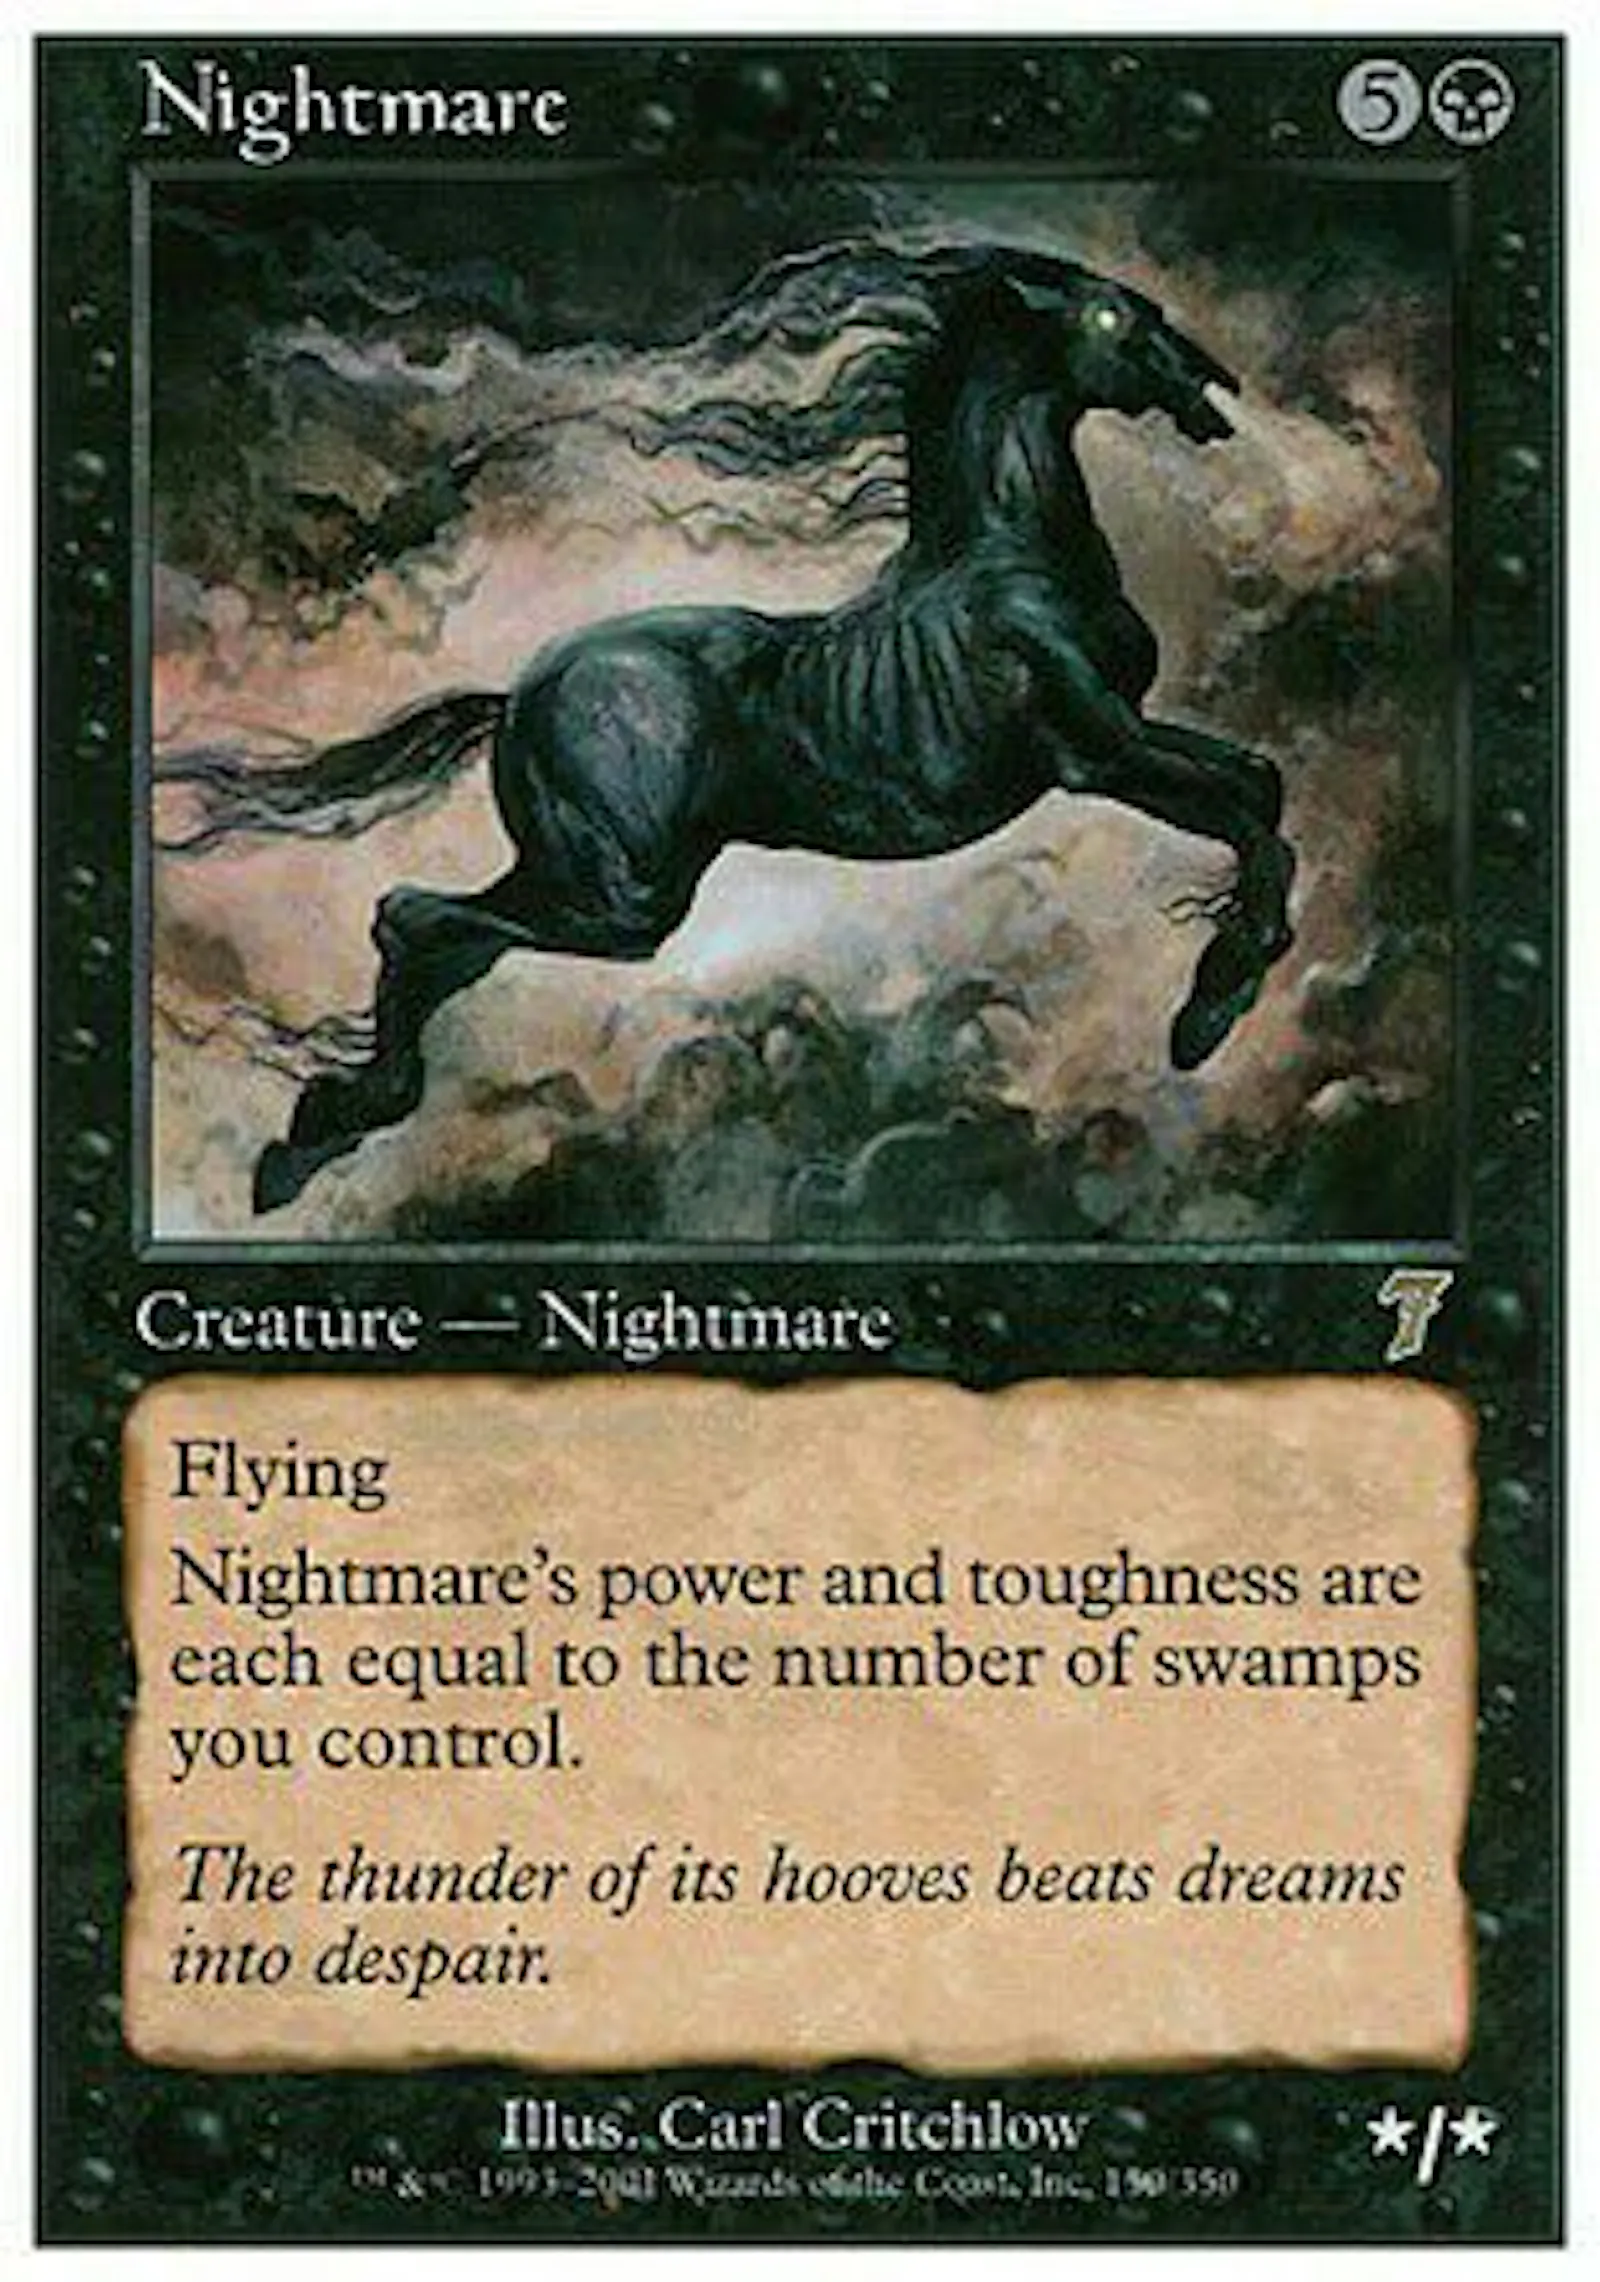 Nightmare, Magic: The Gathering, 2001, Carl Critchlow.